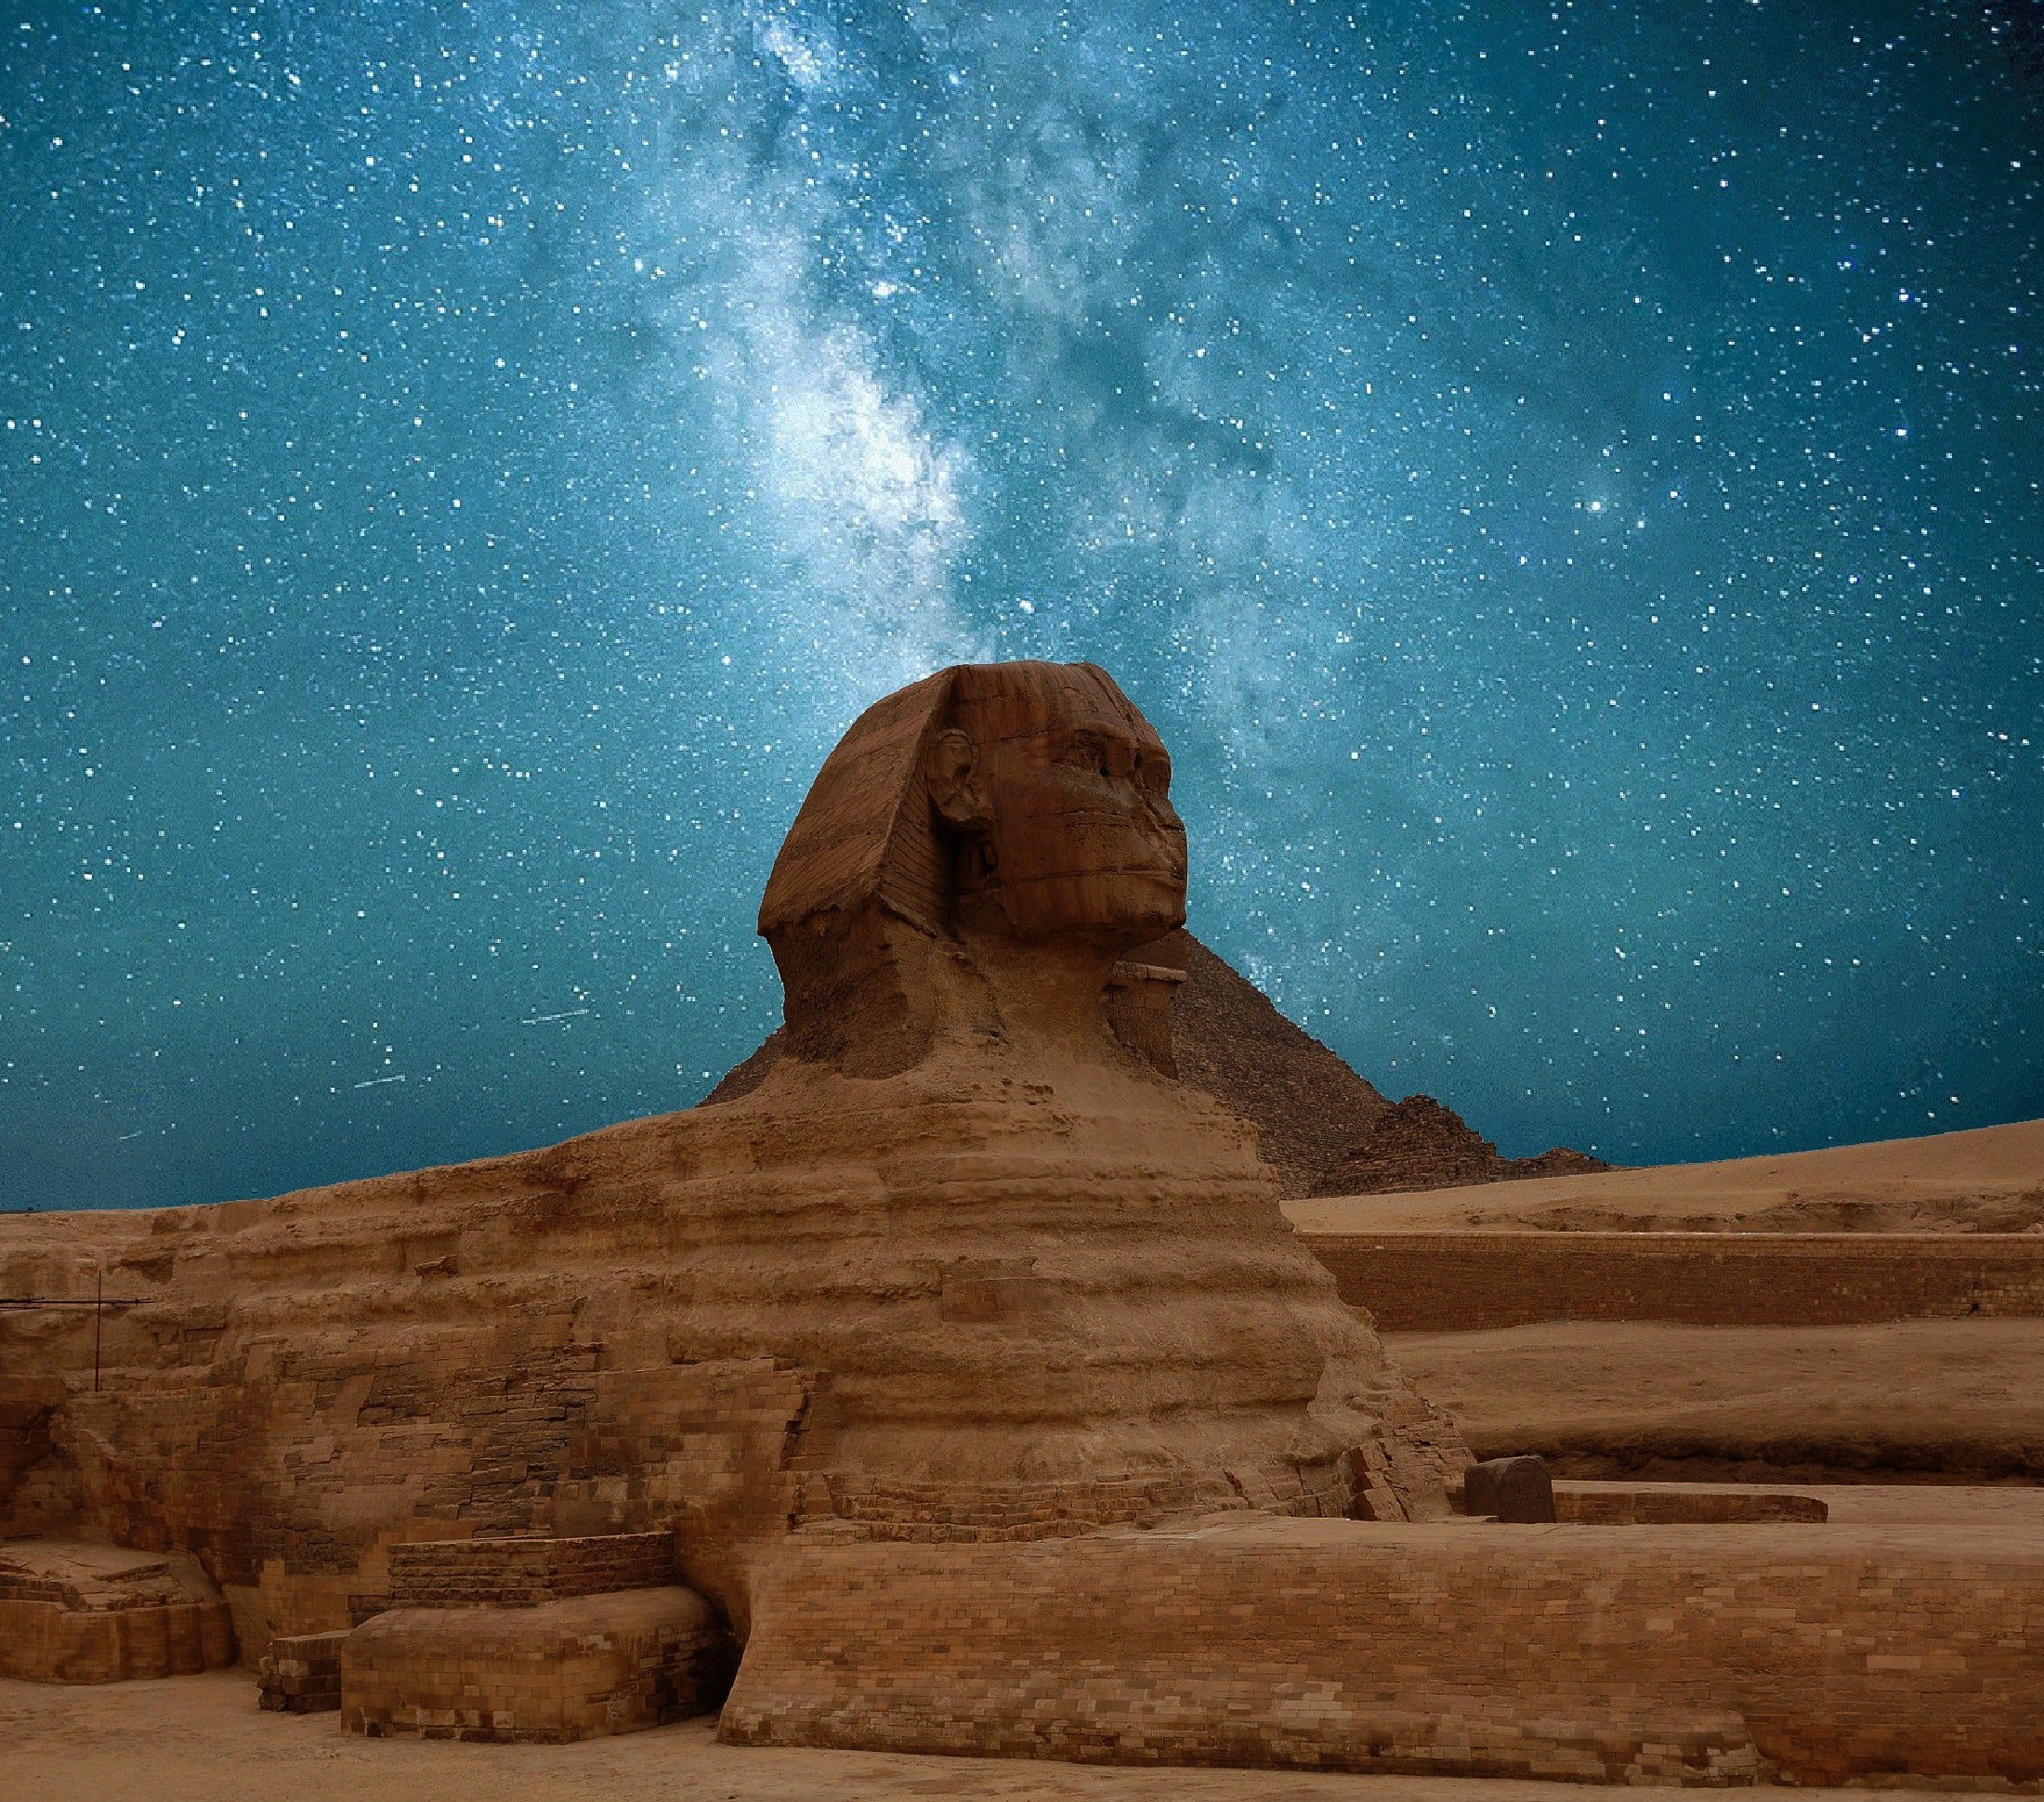 Night view of Sphinx in Egypt.